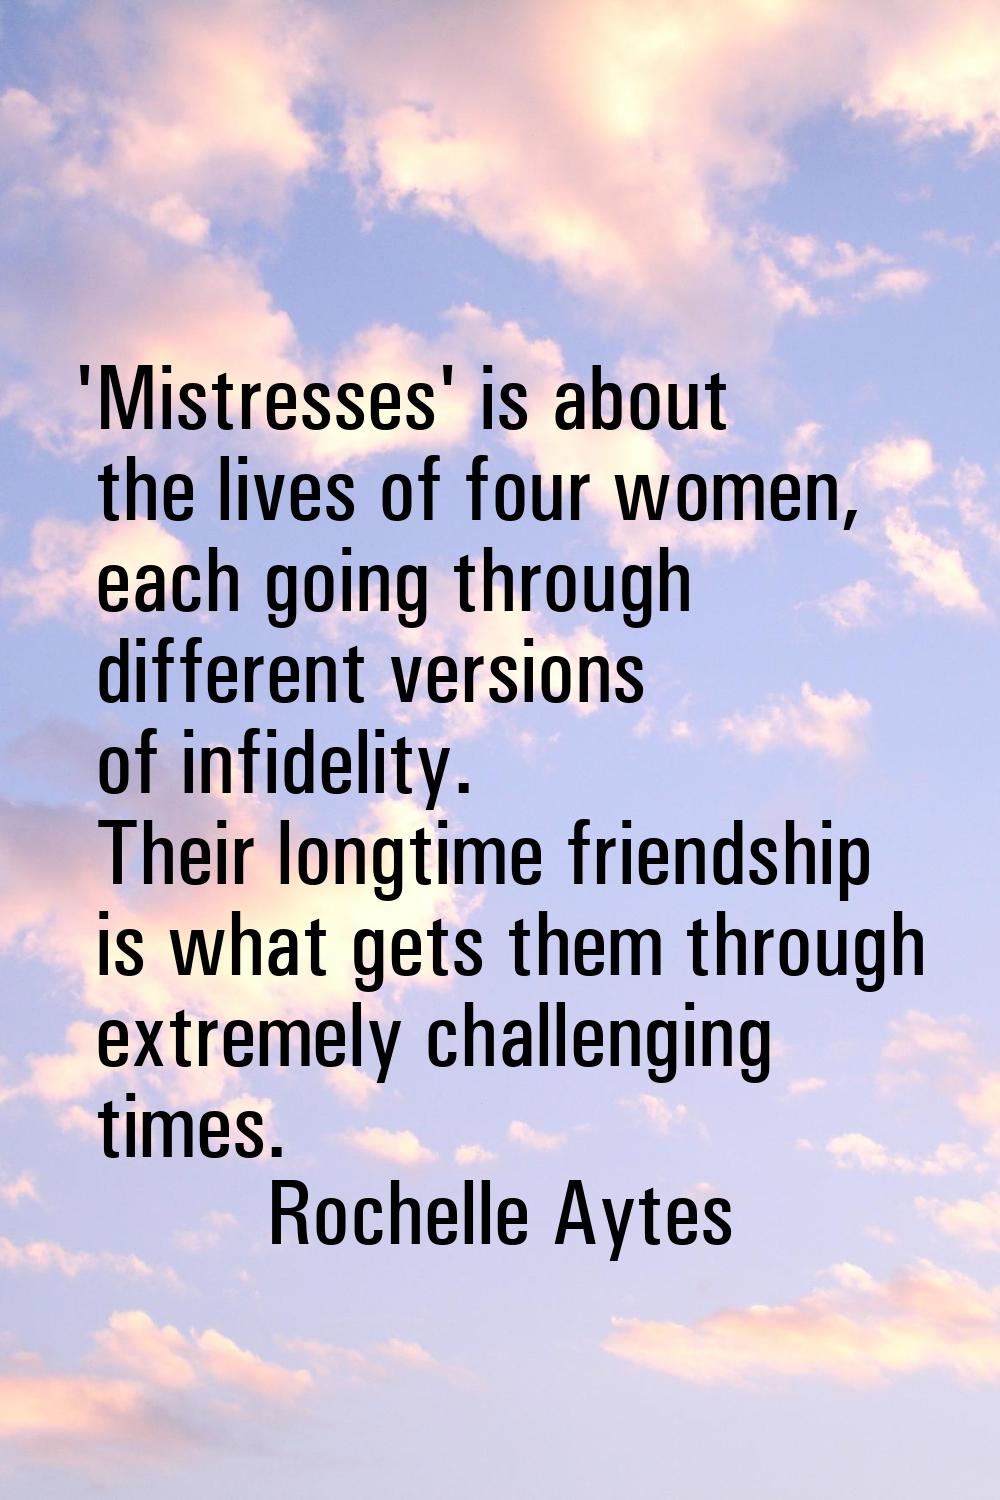 'Mistresses' is about the lives of four women, each going through different versions of infidelity.